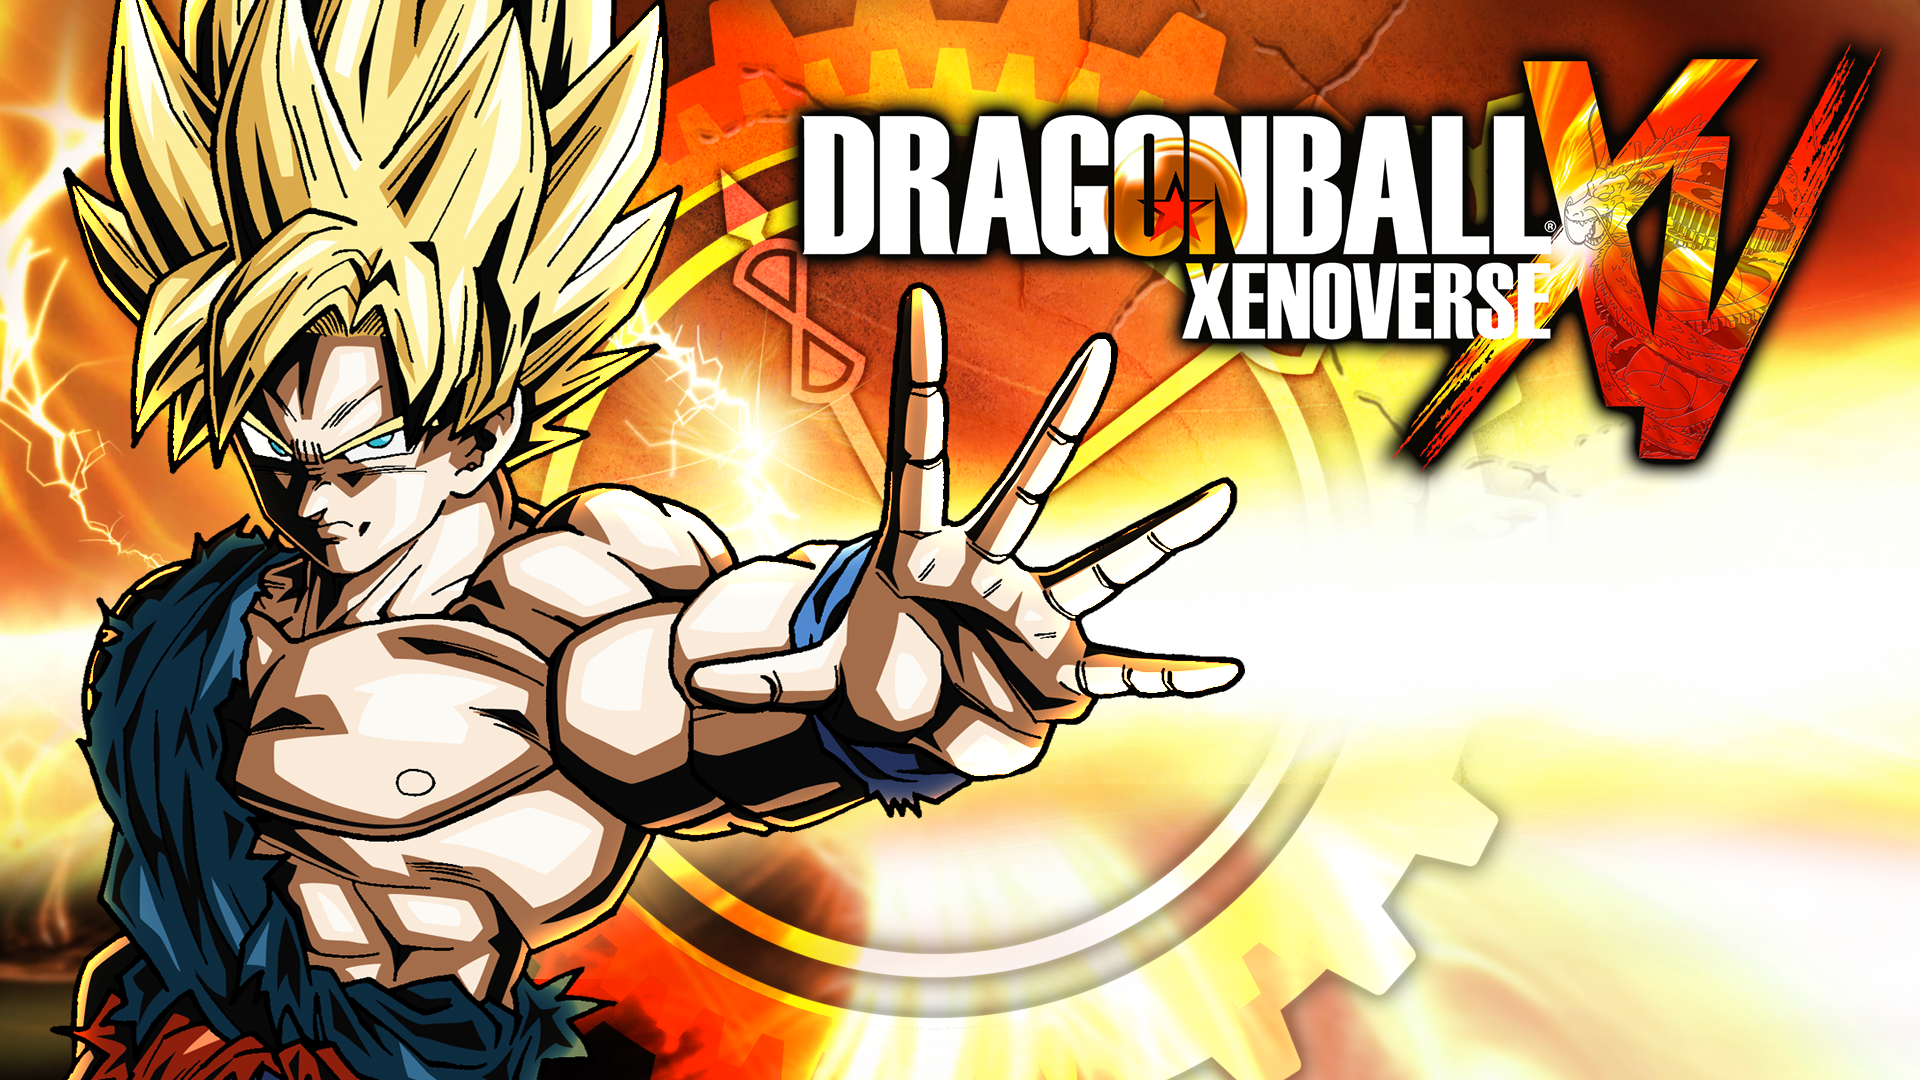 Dragon Ball Xenoverse Free Download Incl All Dlc S Crohasit Download Pc Games For Free - roblox dragon ball z download pc